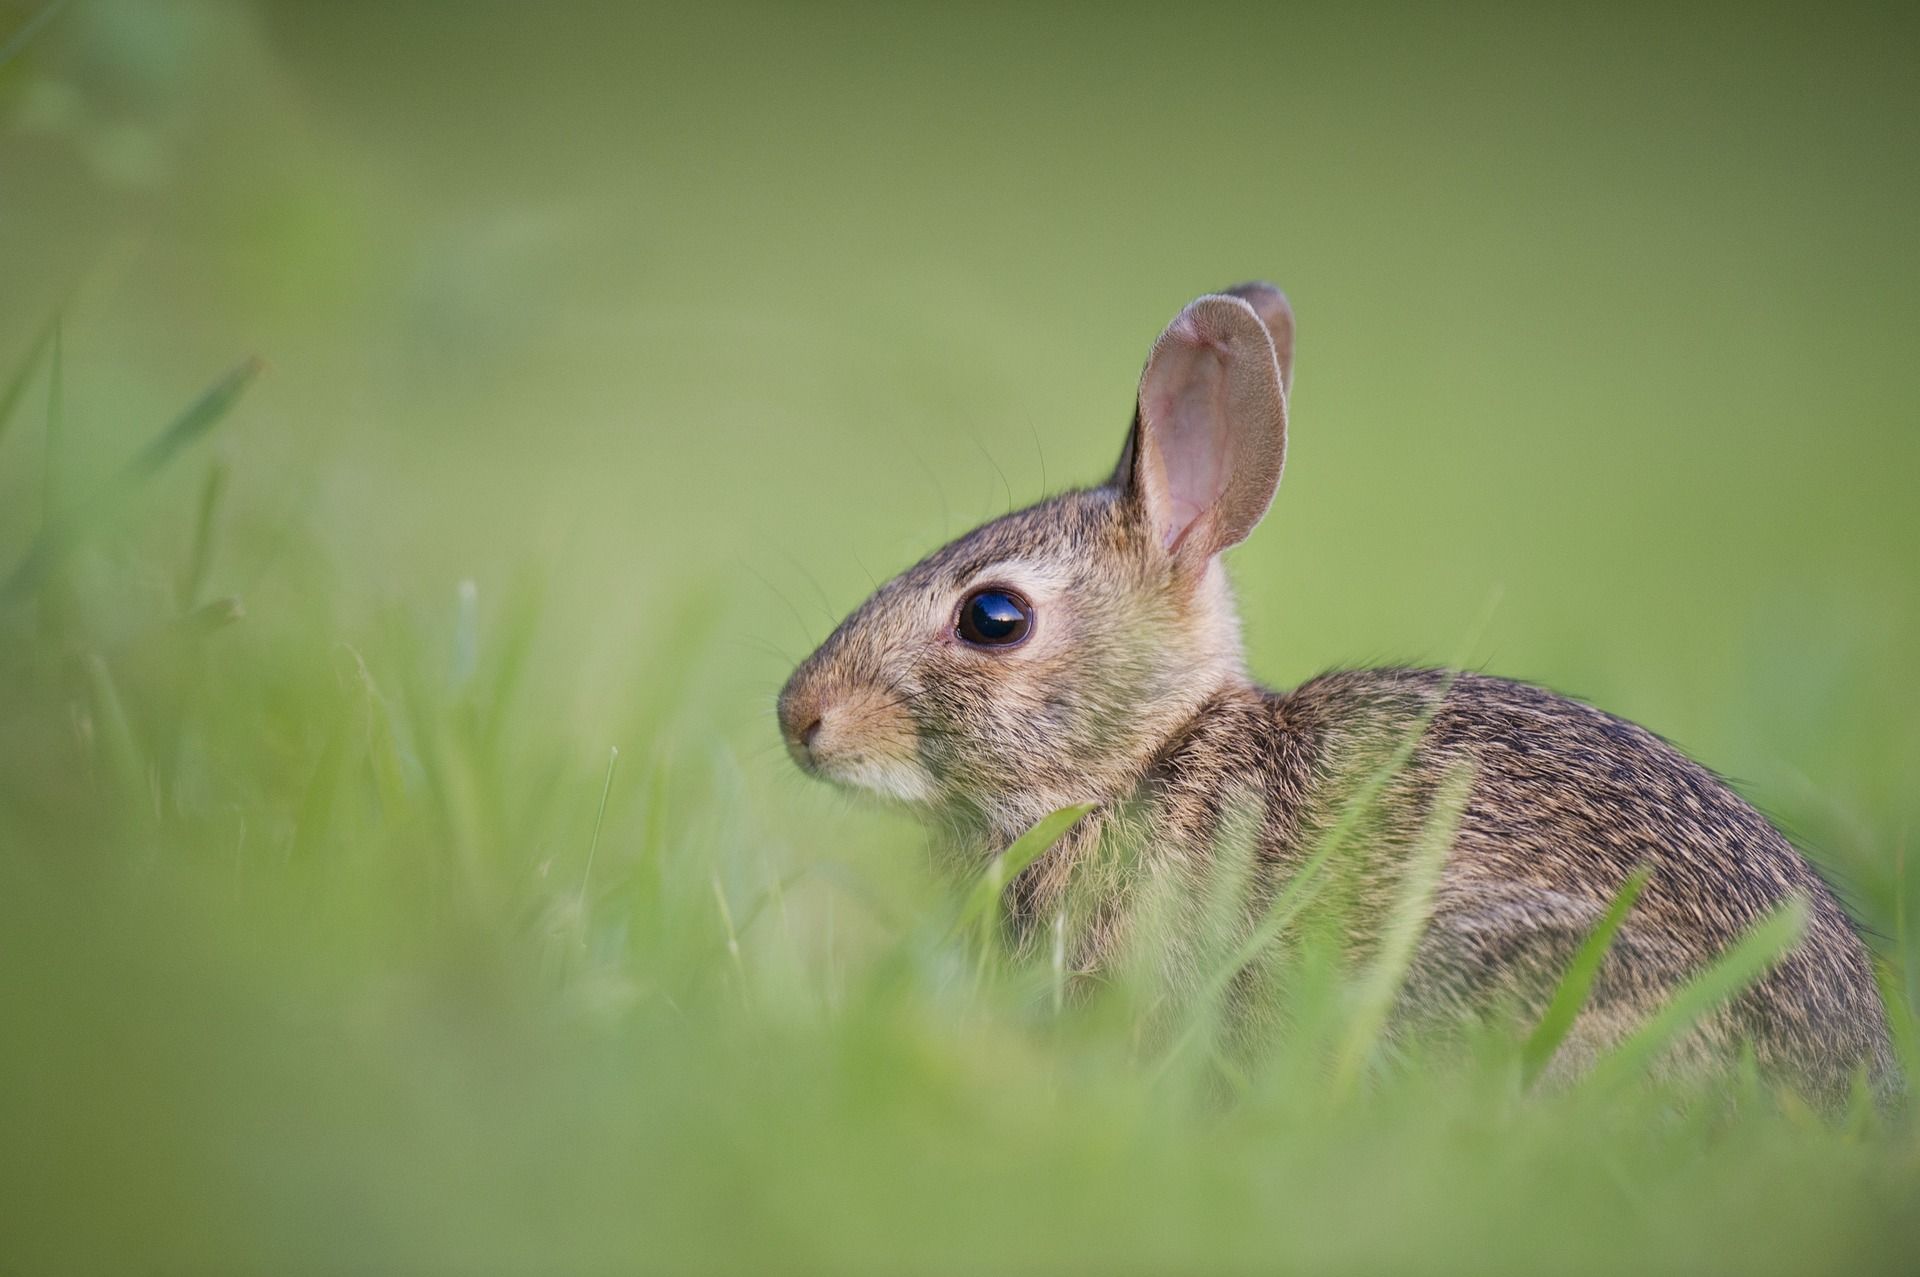 Corona Round-Up: Vaccines prove successful against cluster-5 mutation in rabbits